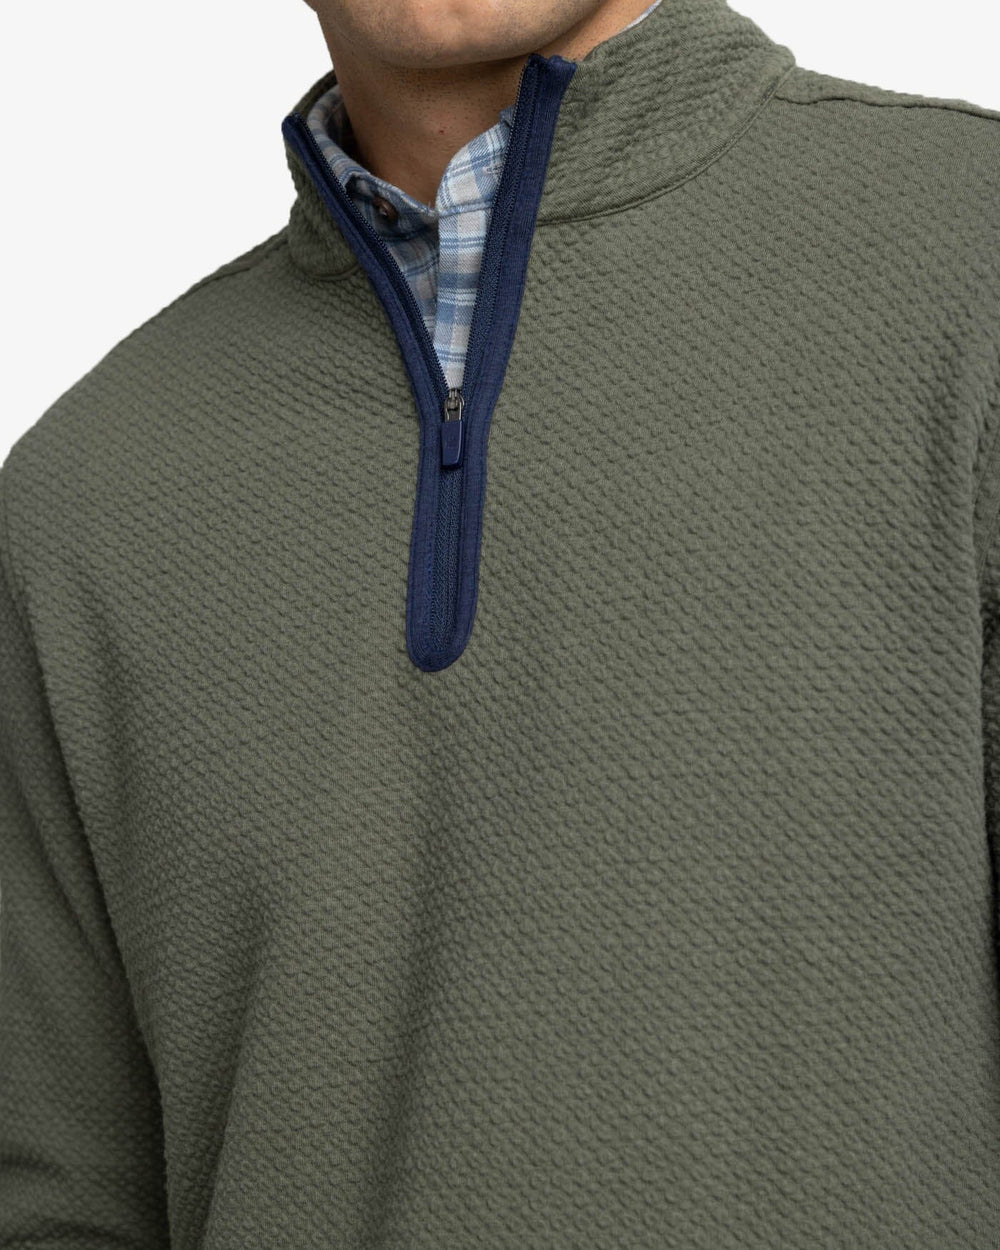 The detail view of the Southern Tide Heather Outbound Quarter Zip by Southern Tide - Heather Gulf Green